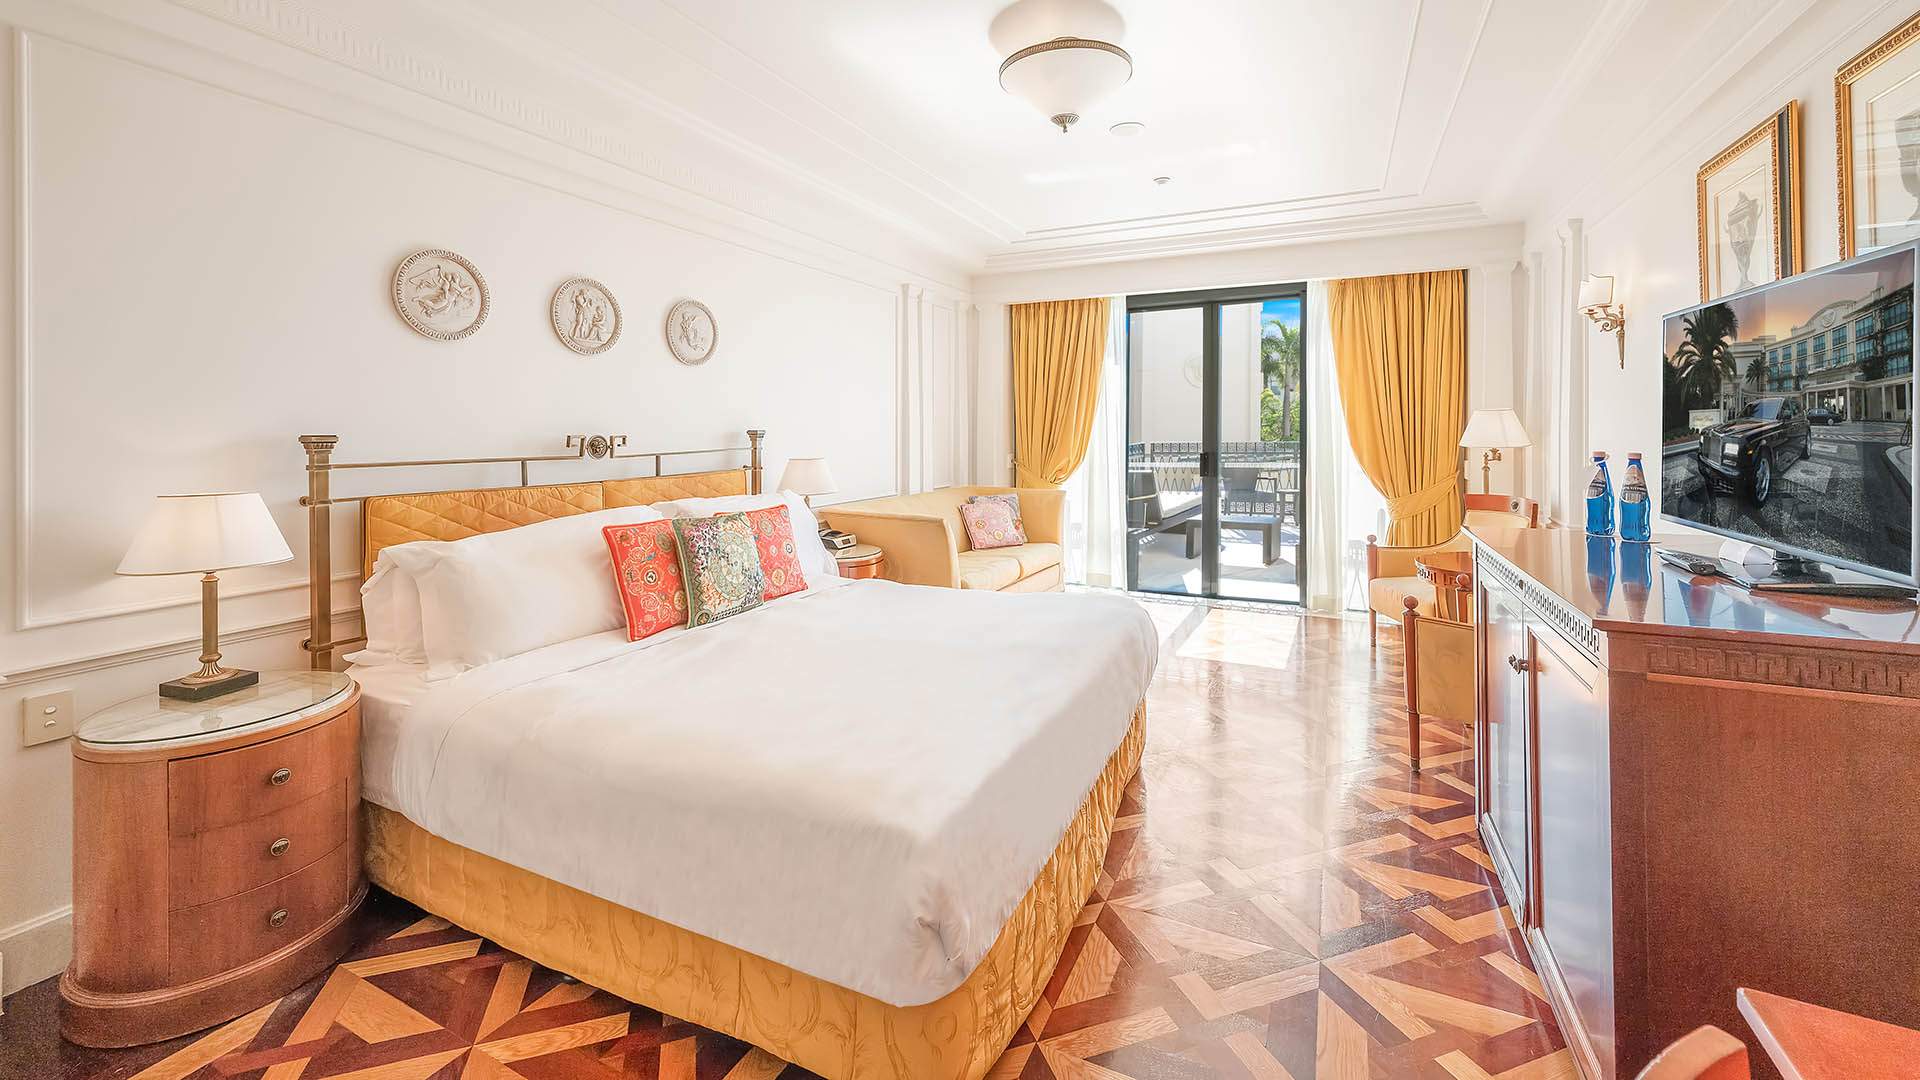 The Gold Coast's Palazzo Versace Has Been Reborn as the Imperial Hotel and Is Set for a Refurb